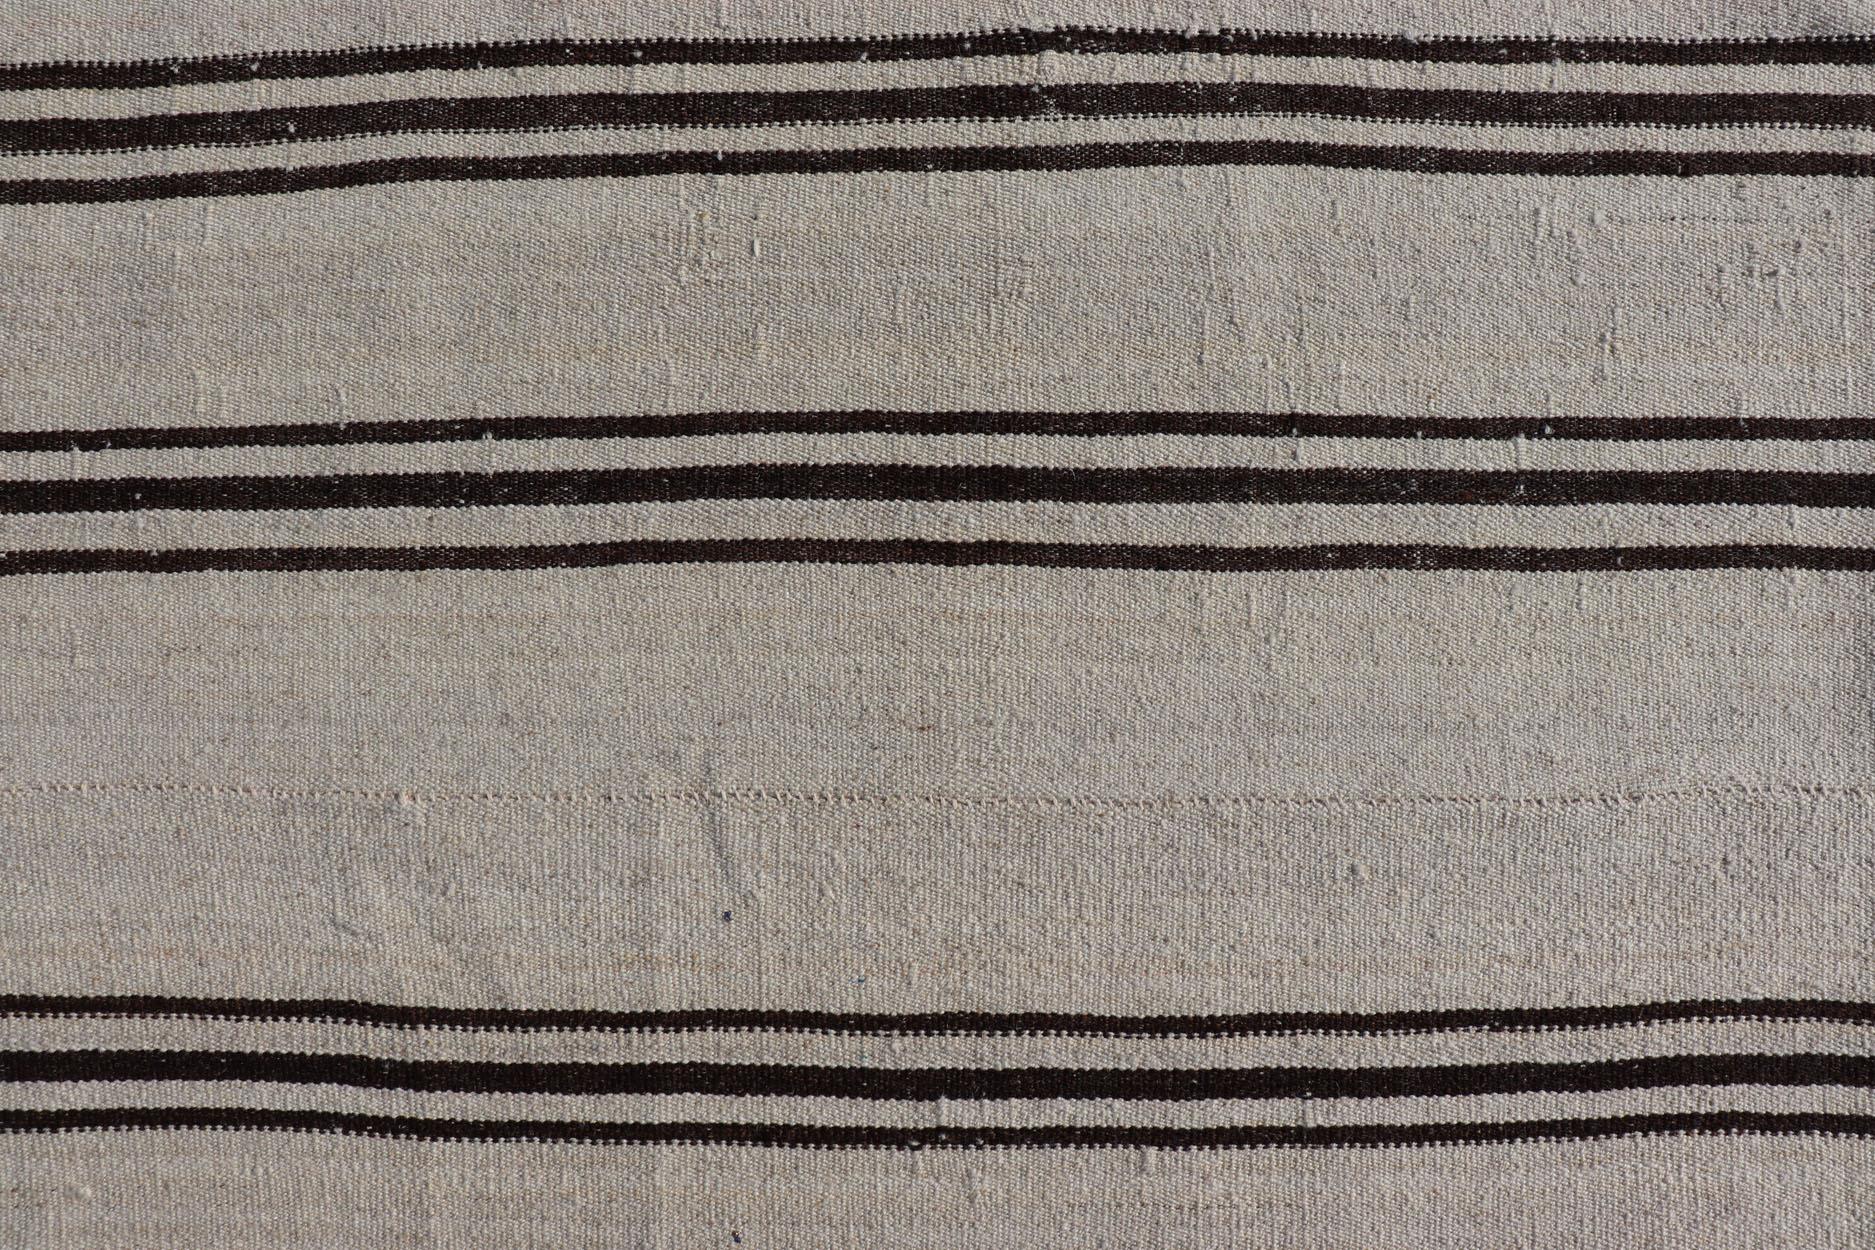 Vintage Turkish Kilim Rug With Vertical Stripes in Off White and Brown Stripes For Sale 4